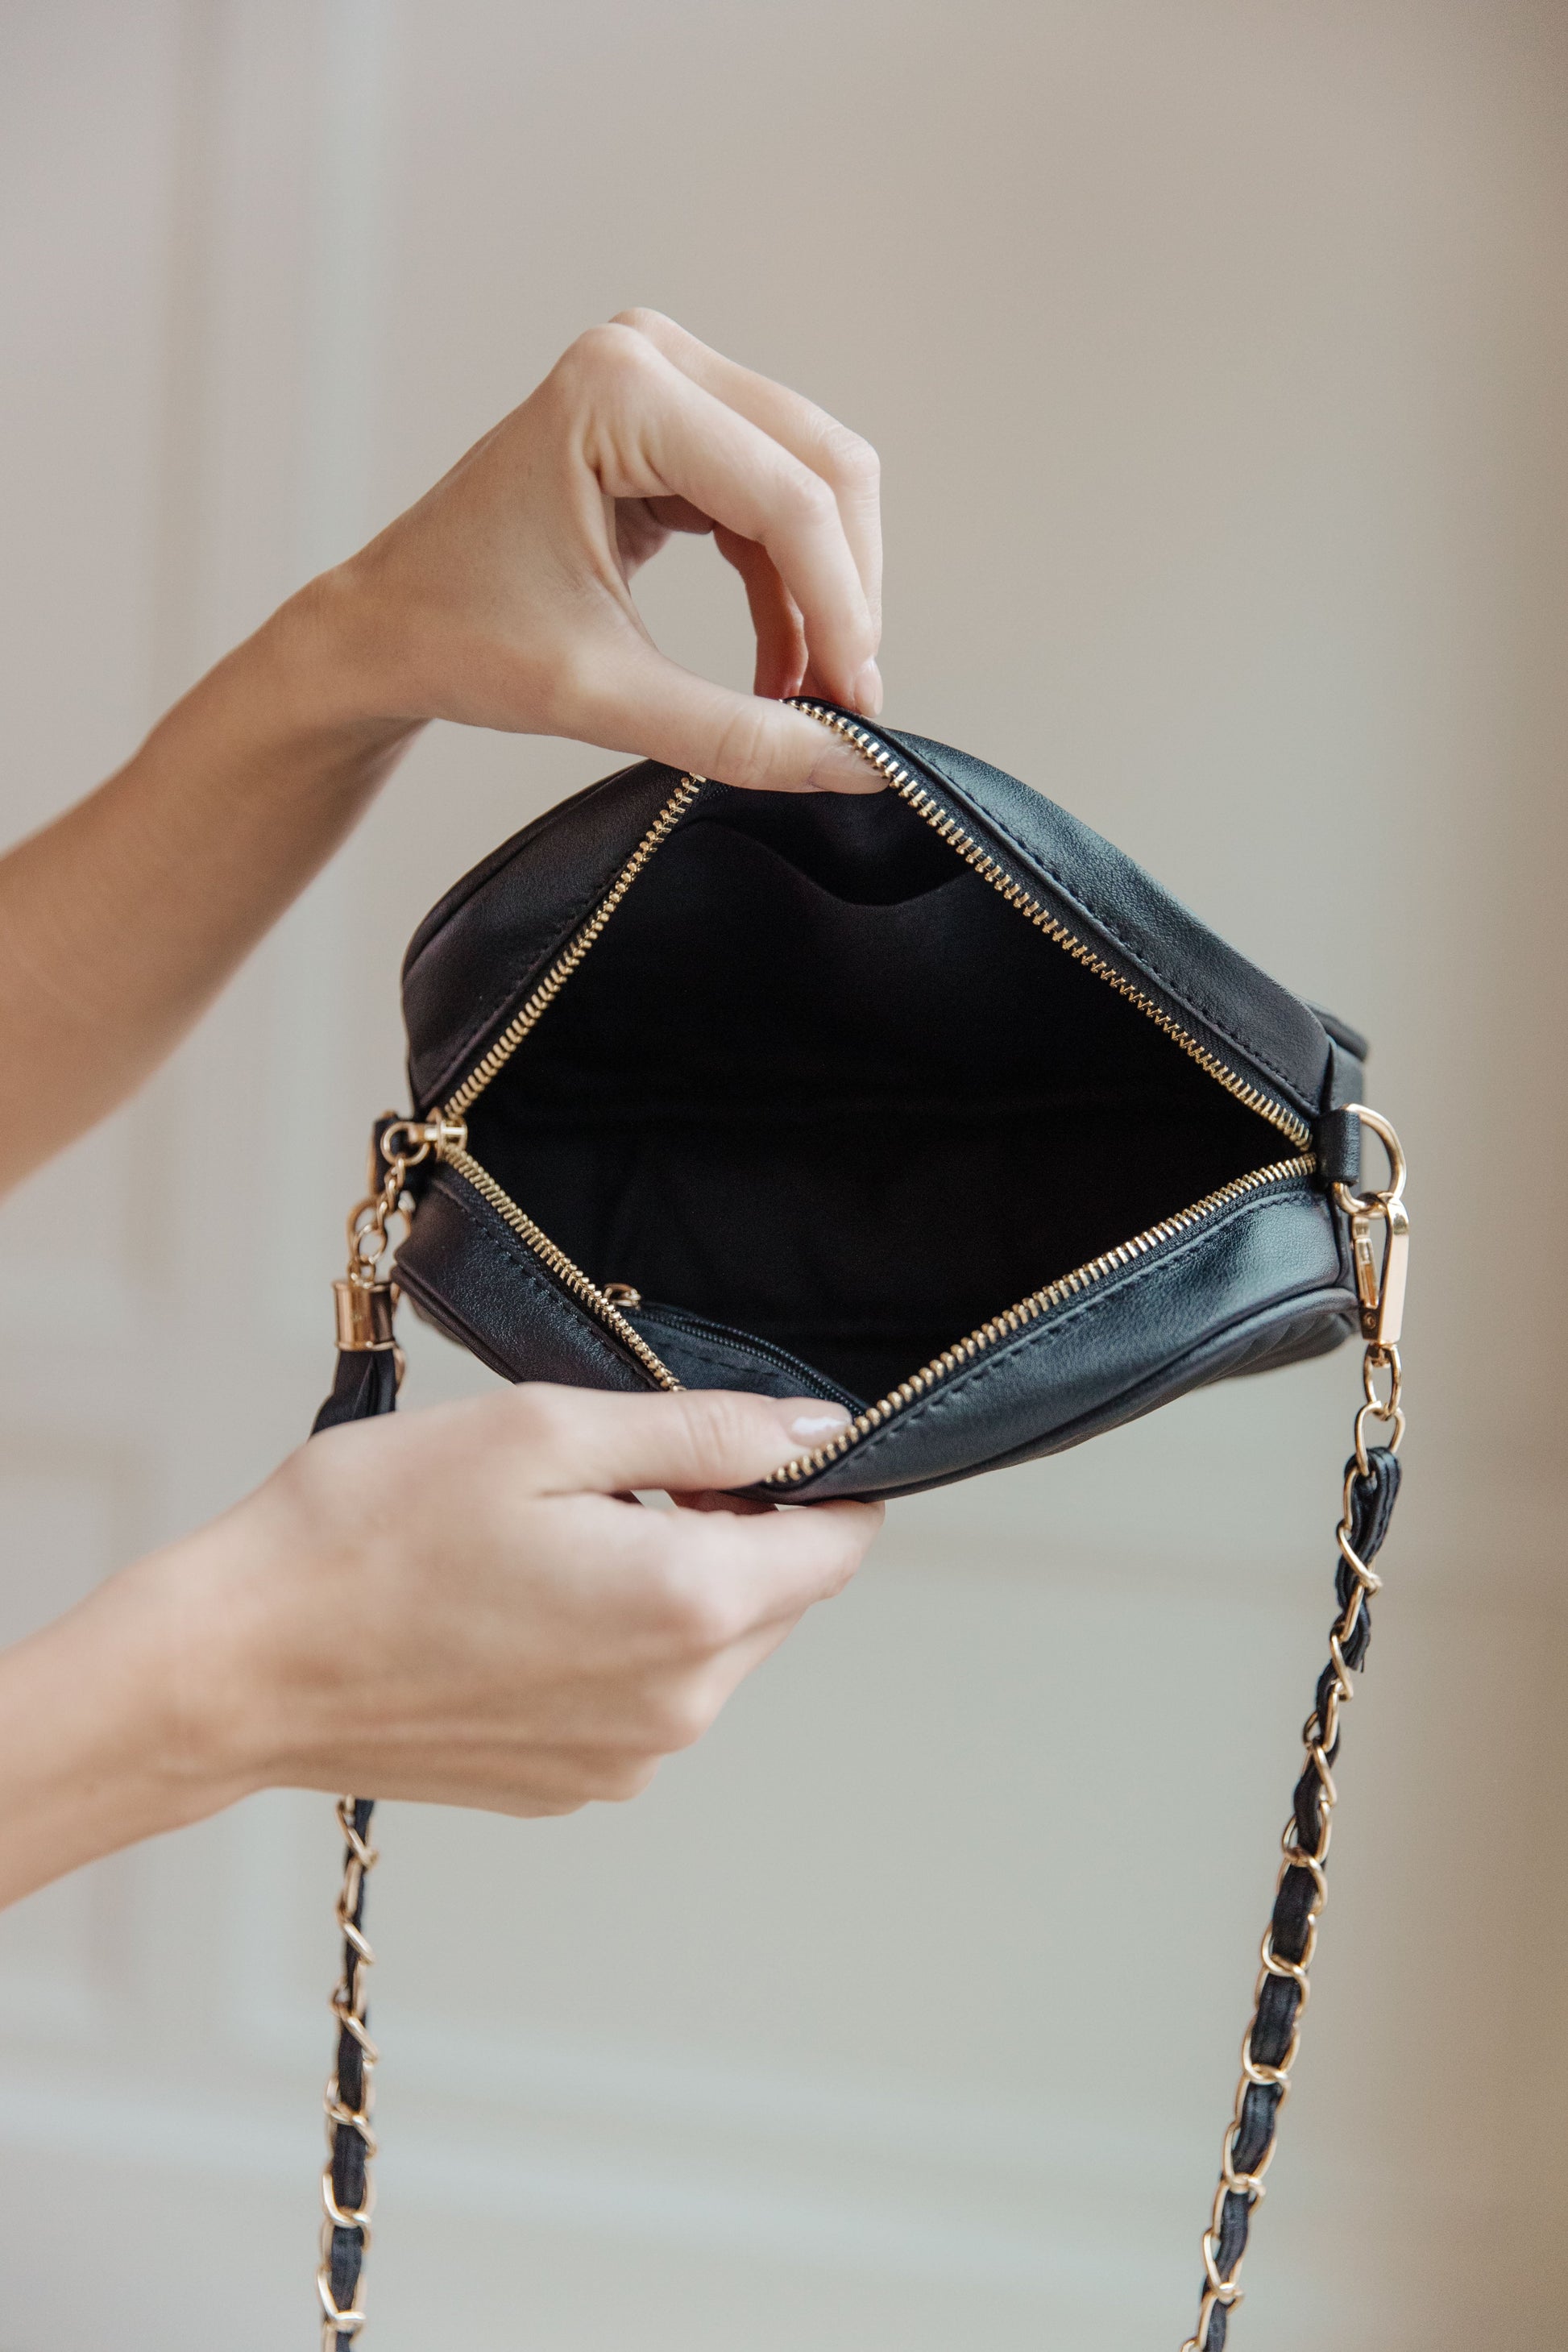 Make your style statement with the Get What You Need Crossbody. Crafted with quilted vegan leather and gold accents, it features a gold chain strap and tassel zipper for easy access. Plus, it has an inside zipper envelope pocket and open pocket on the opposite side. Look polished, keep what you need!